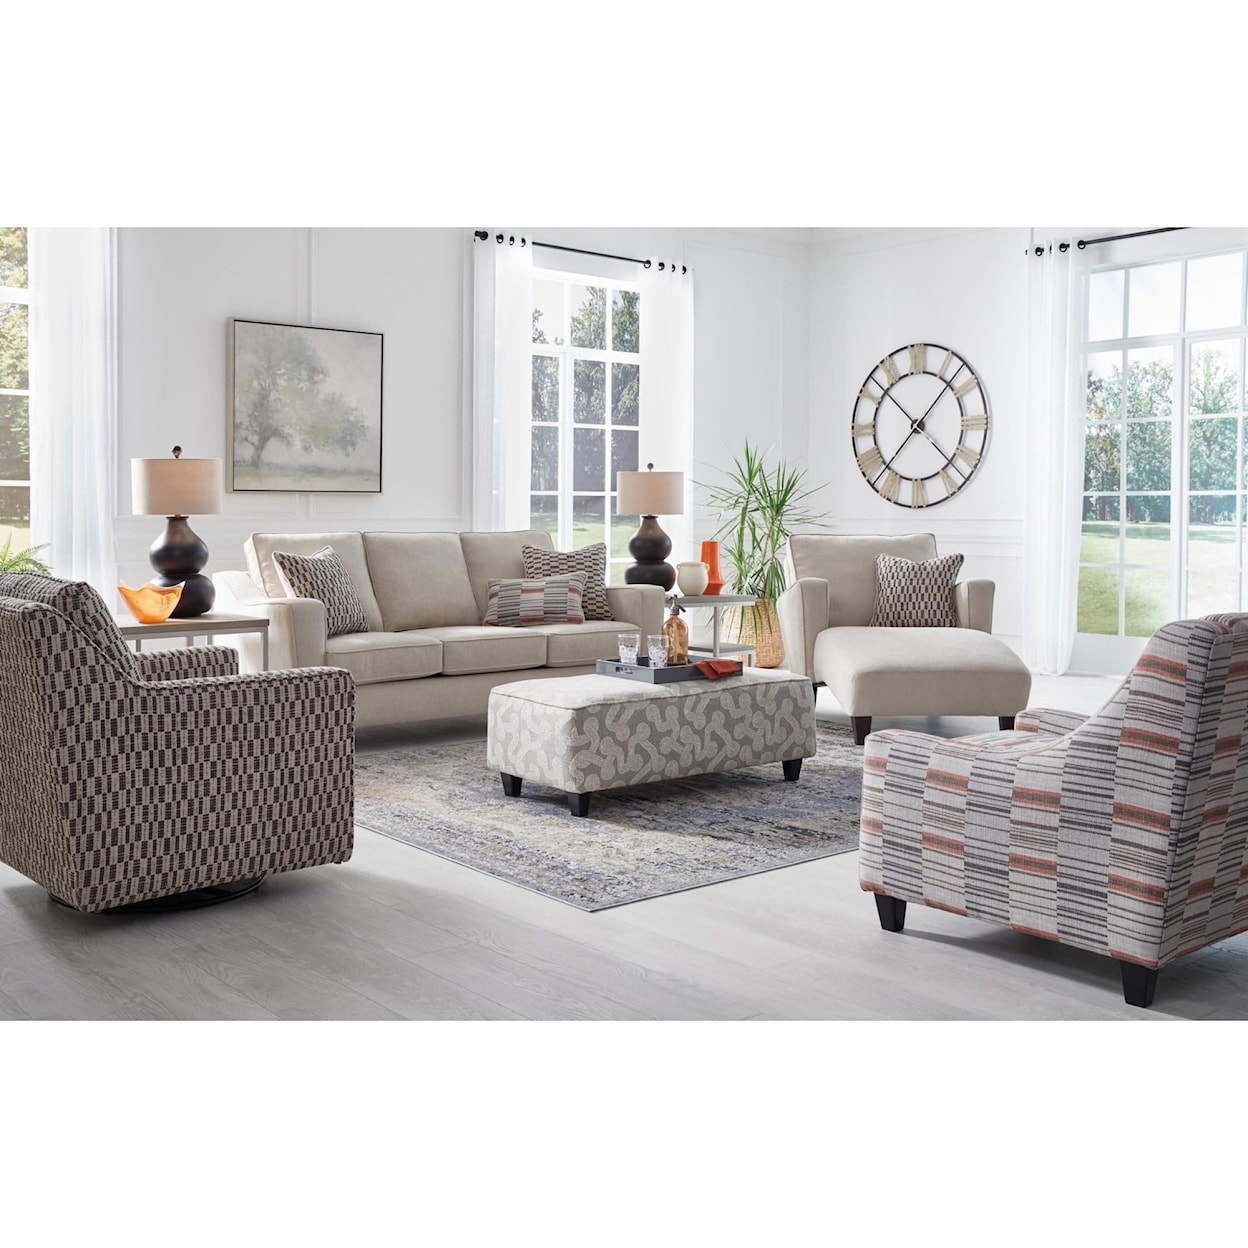 Fusion Furniture 3005 STANLEY SANDSTONE Sofa and Chaise Lounge